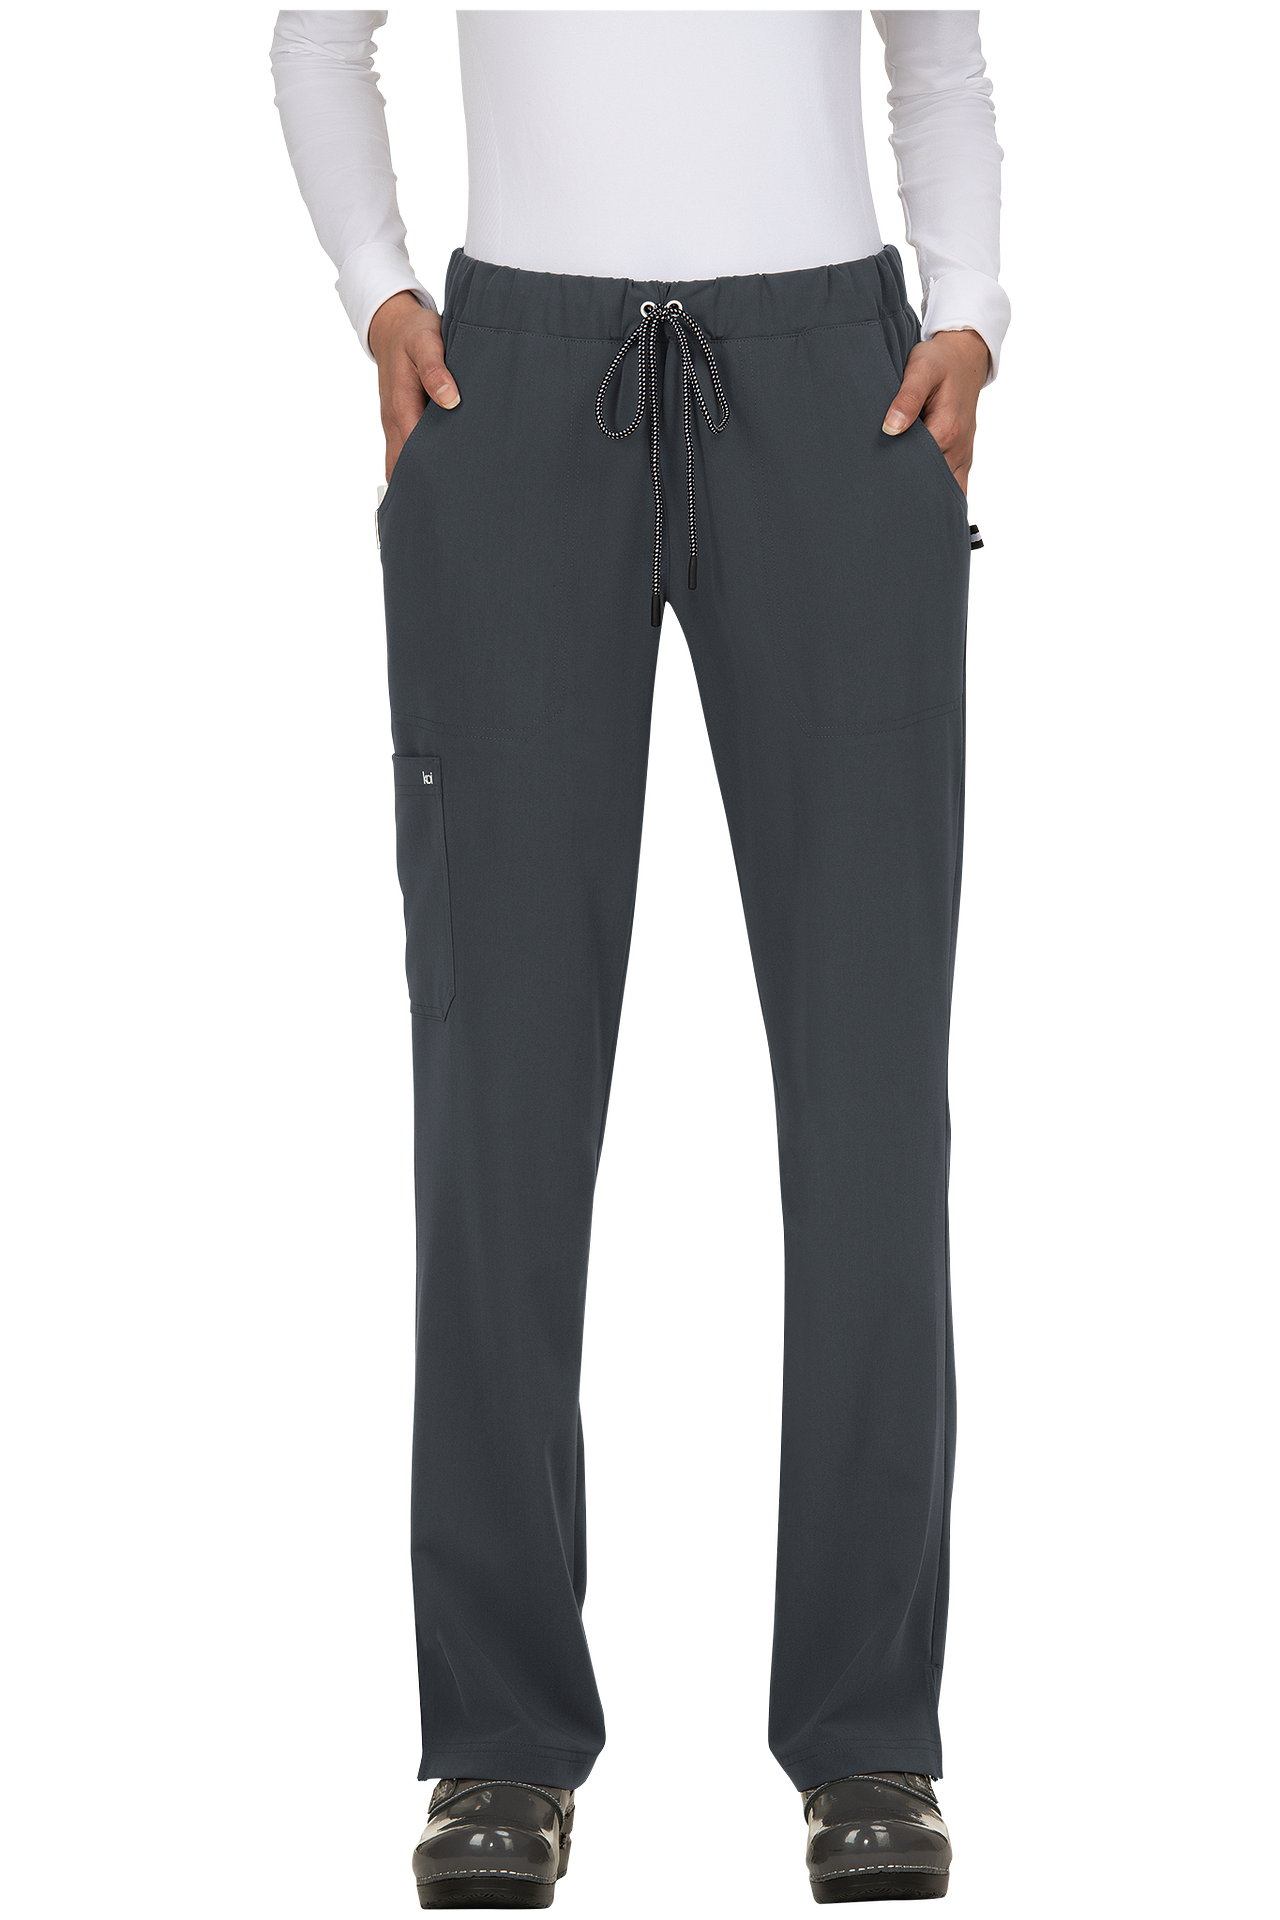 Koi Scrub Pant Next Gen Everyday Hero in Charcoal at Parker's Clothing & Shoes.